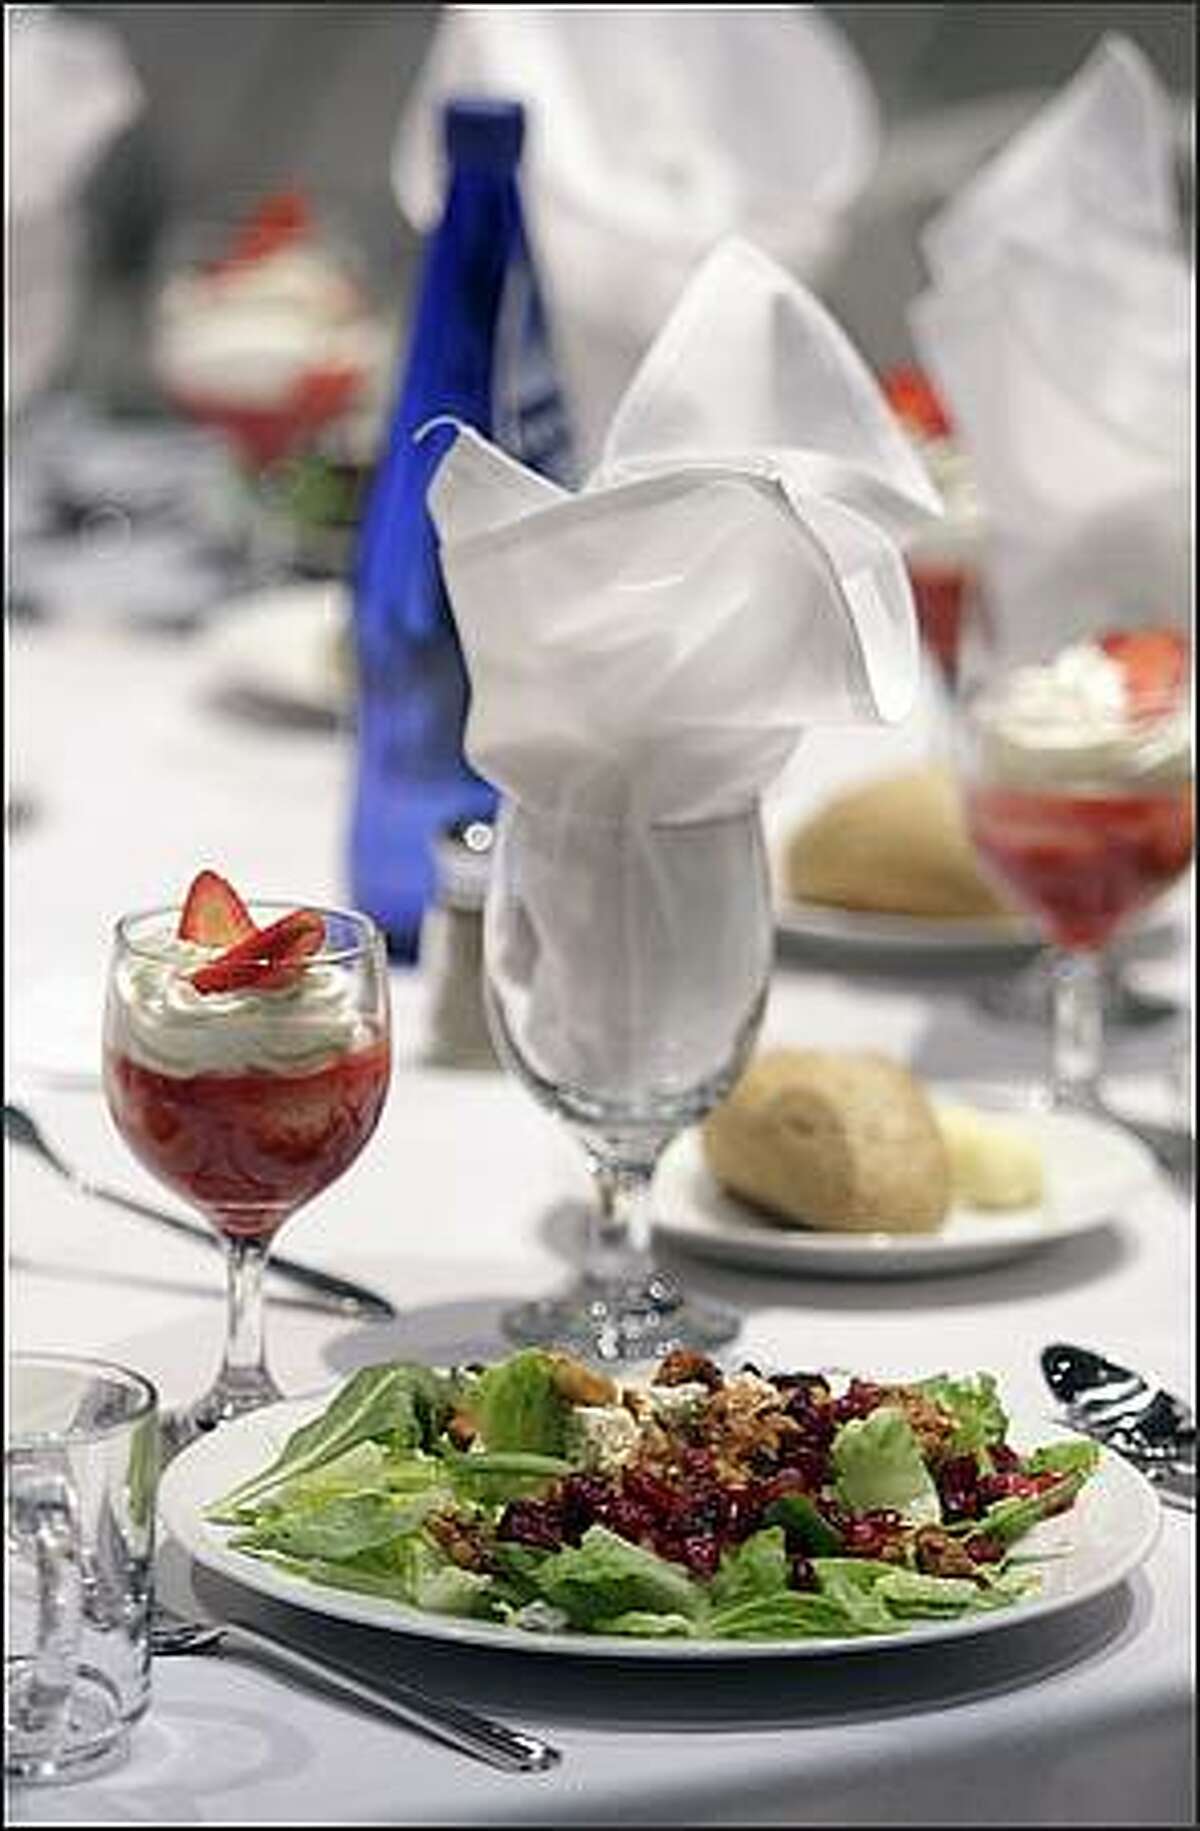 The table settings that awaited attendees at a fund raising lunch for Governor Chris Gregoire at the WaMu Theater.